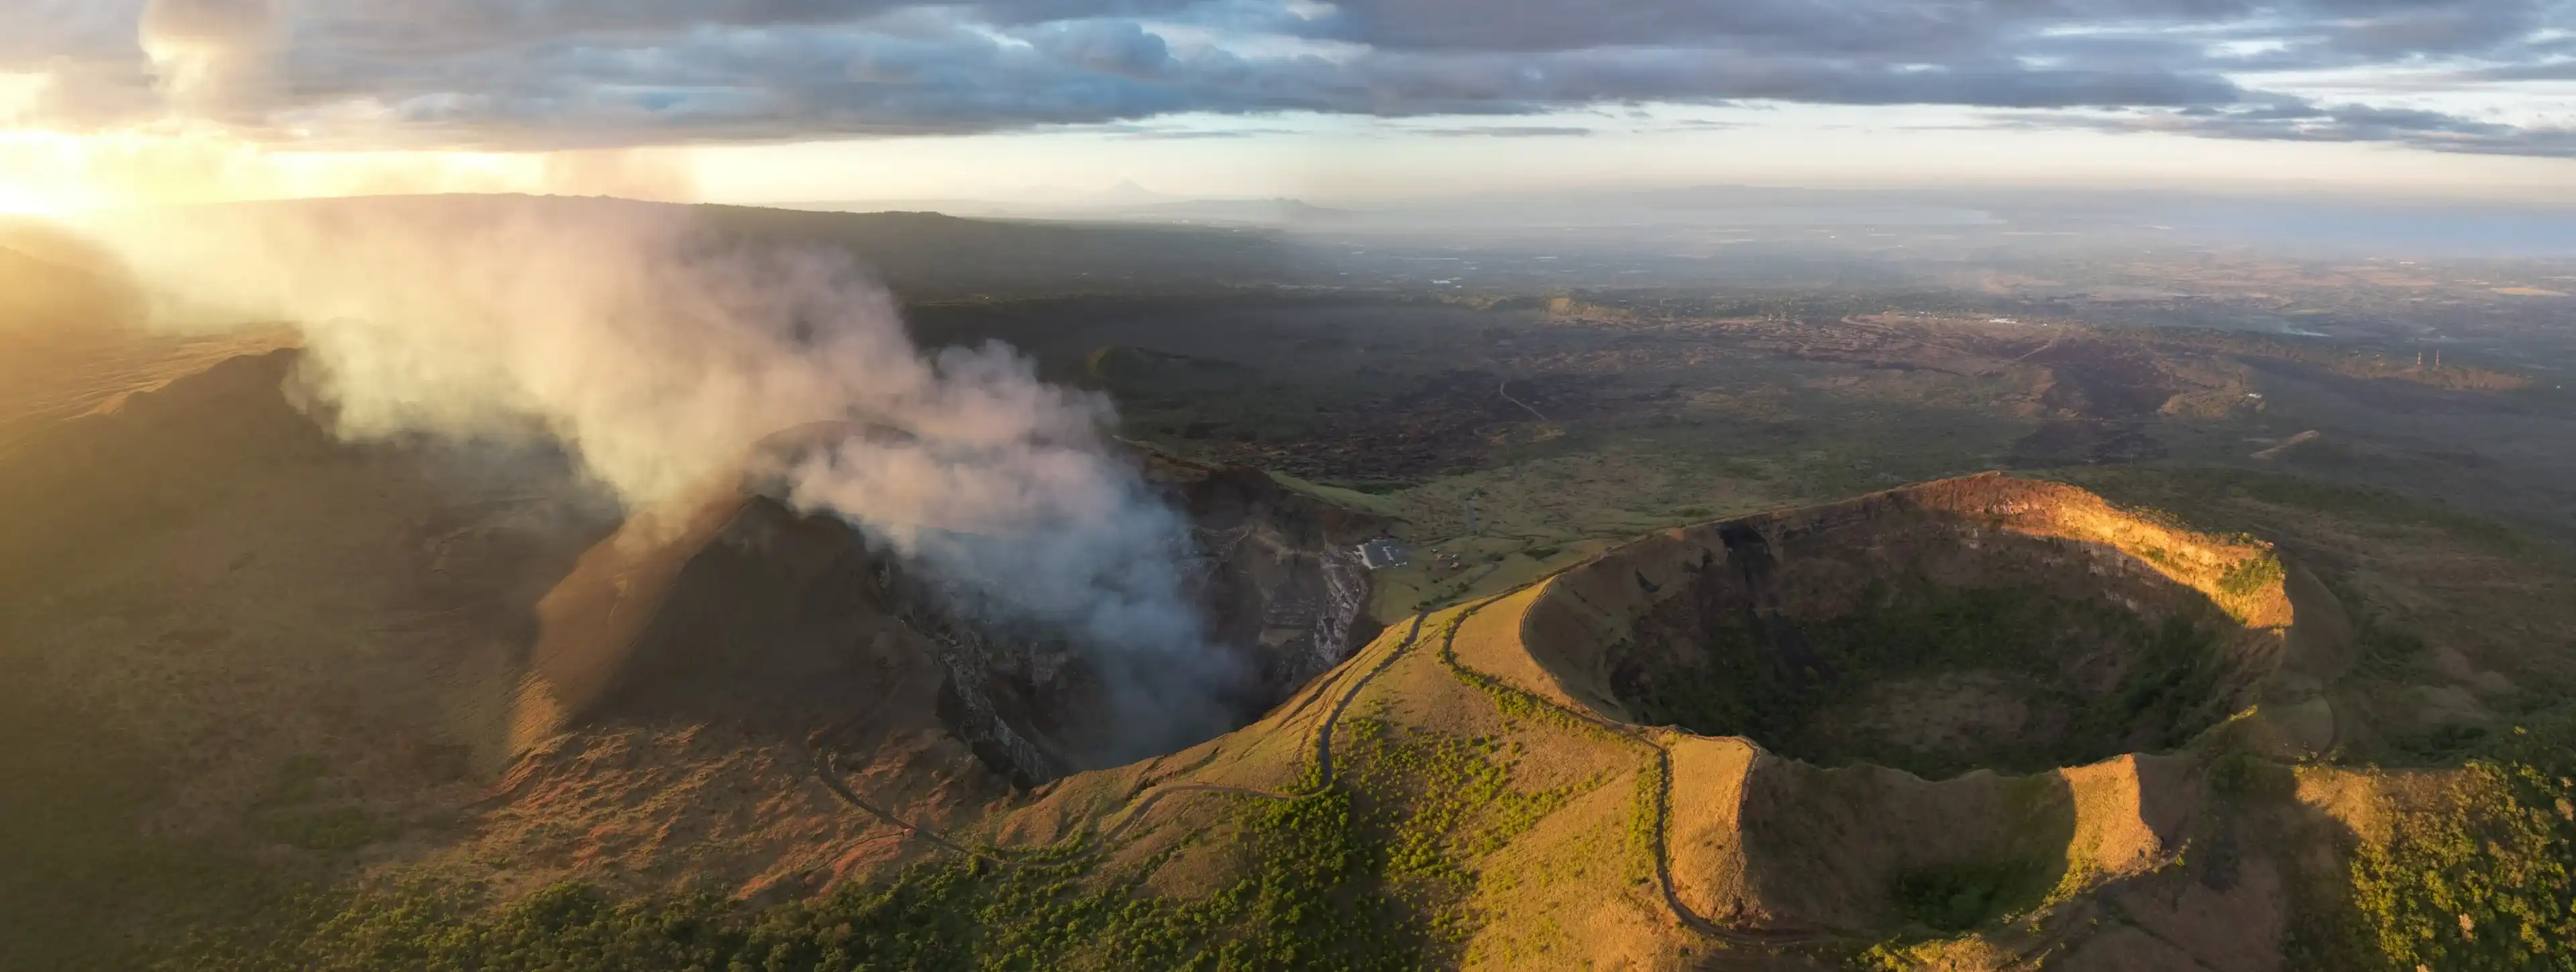 Santiago volcano crater in Masaya Nicaragua aerial drone view on sunset time